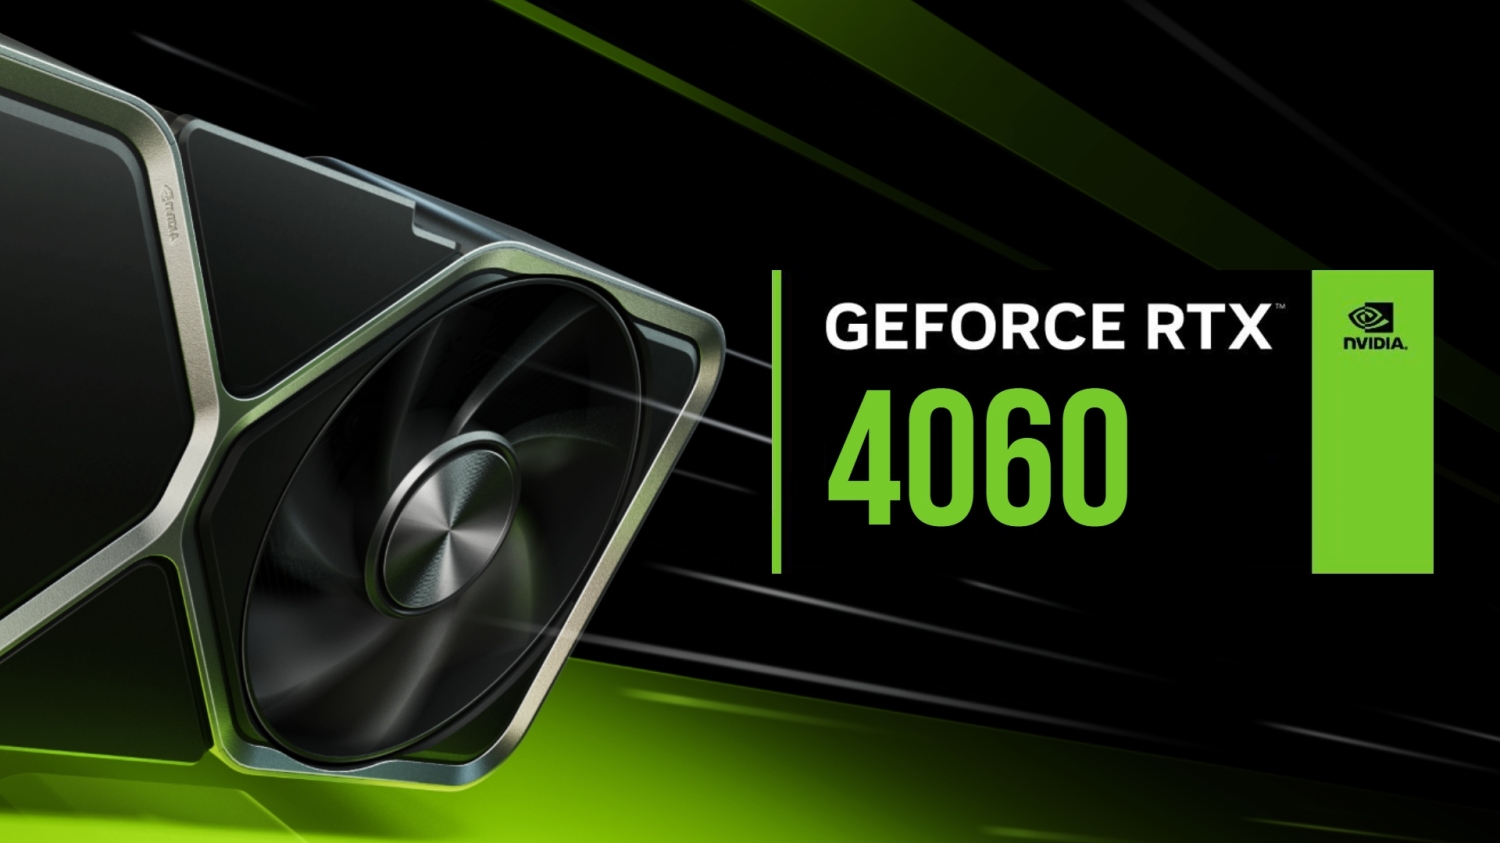 NVIDIA GeForce RTX 4060 Ti Name Gets Confirmed